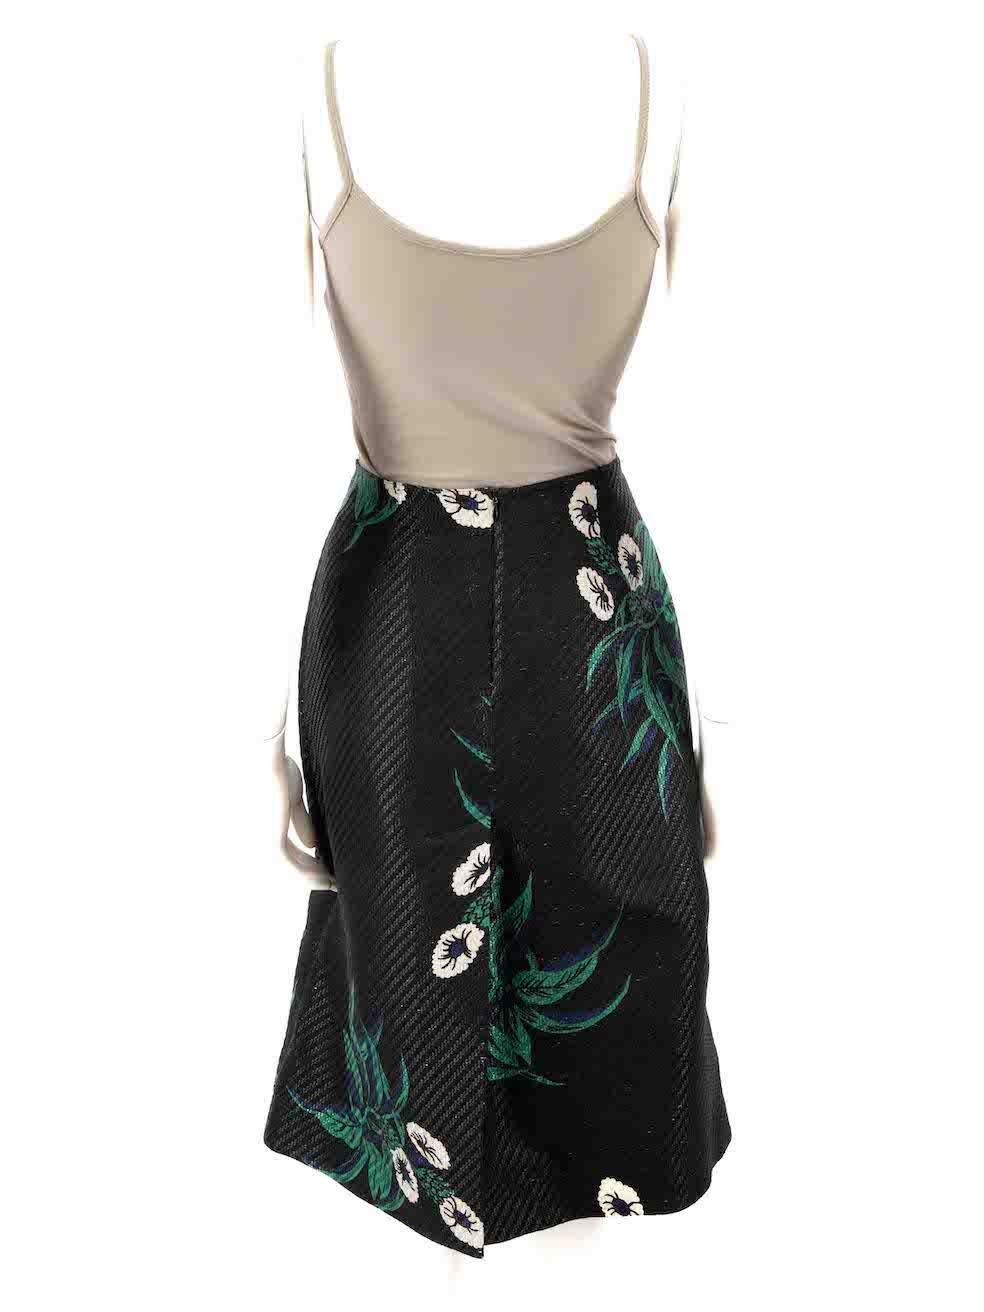 Marni Black Woven Floral Pattern Skirt Size S In Good Condition For Sale In London, GB